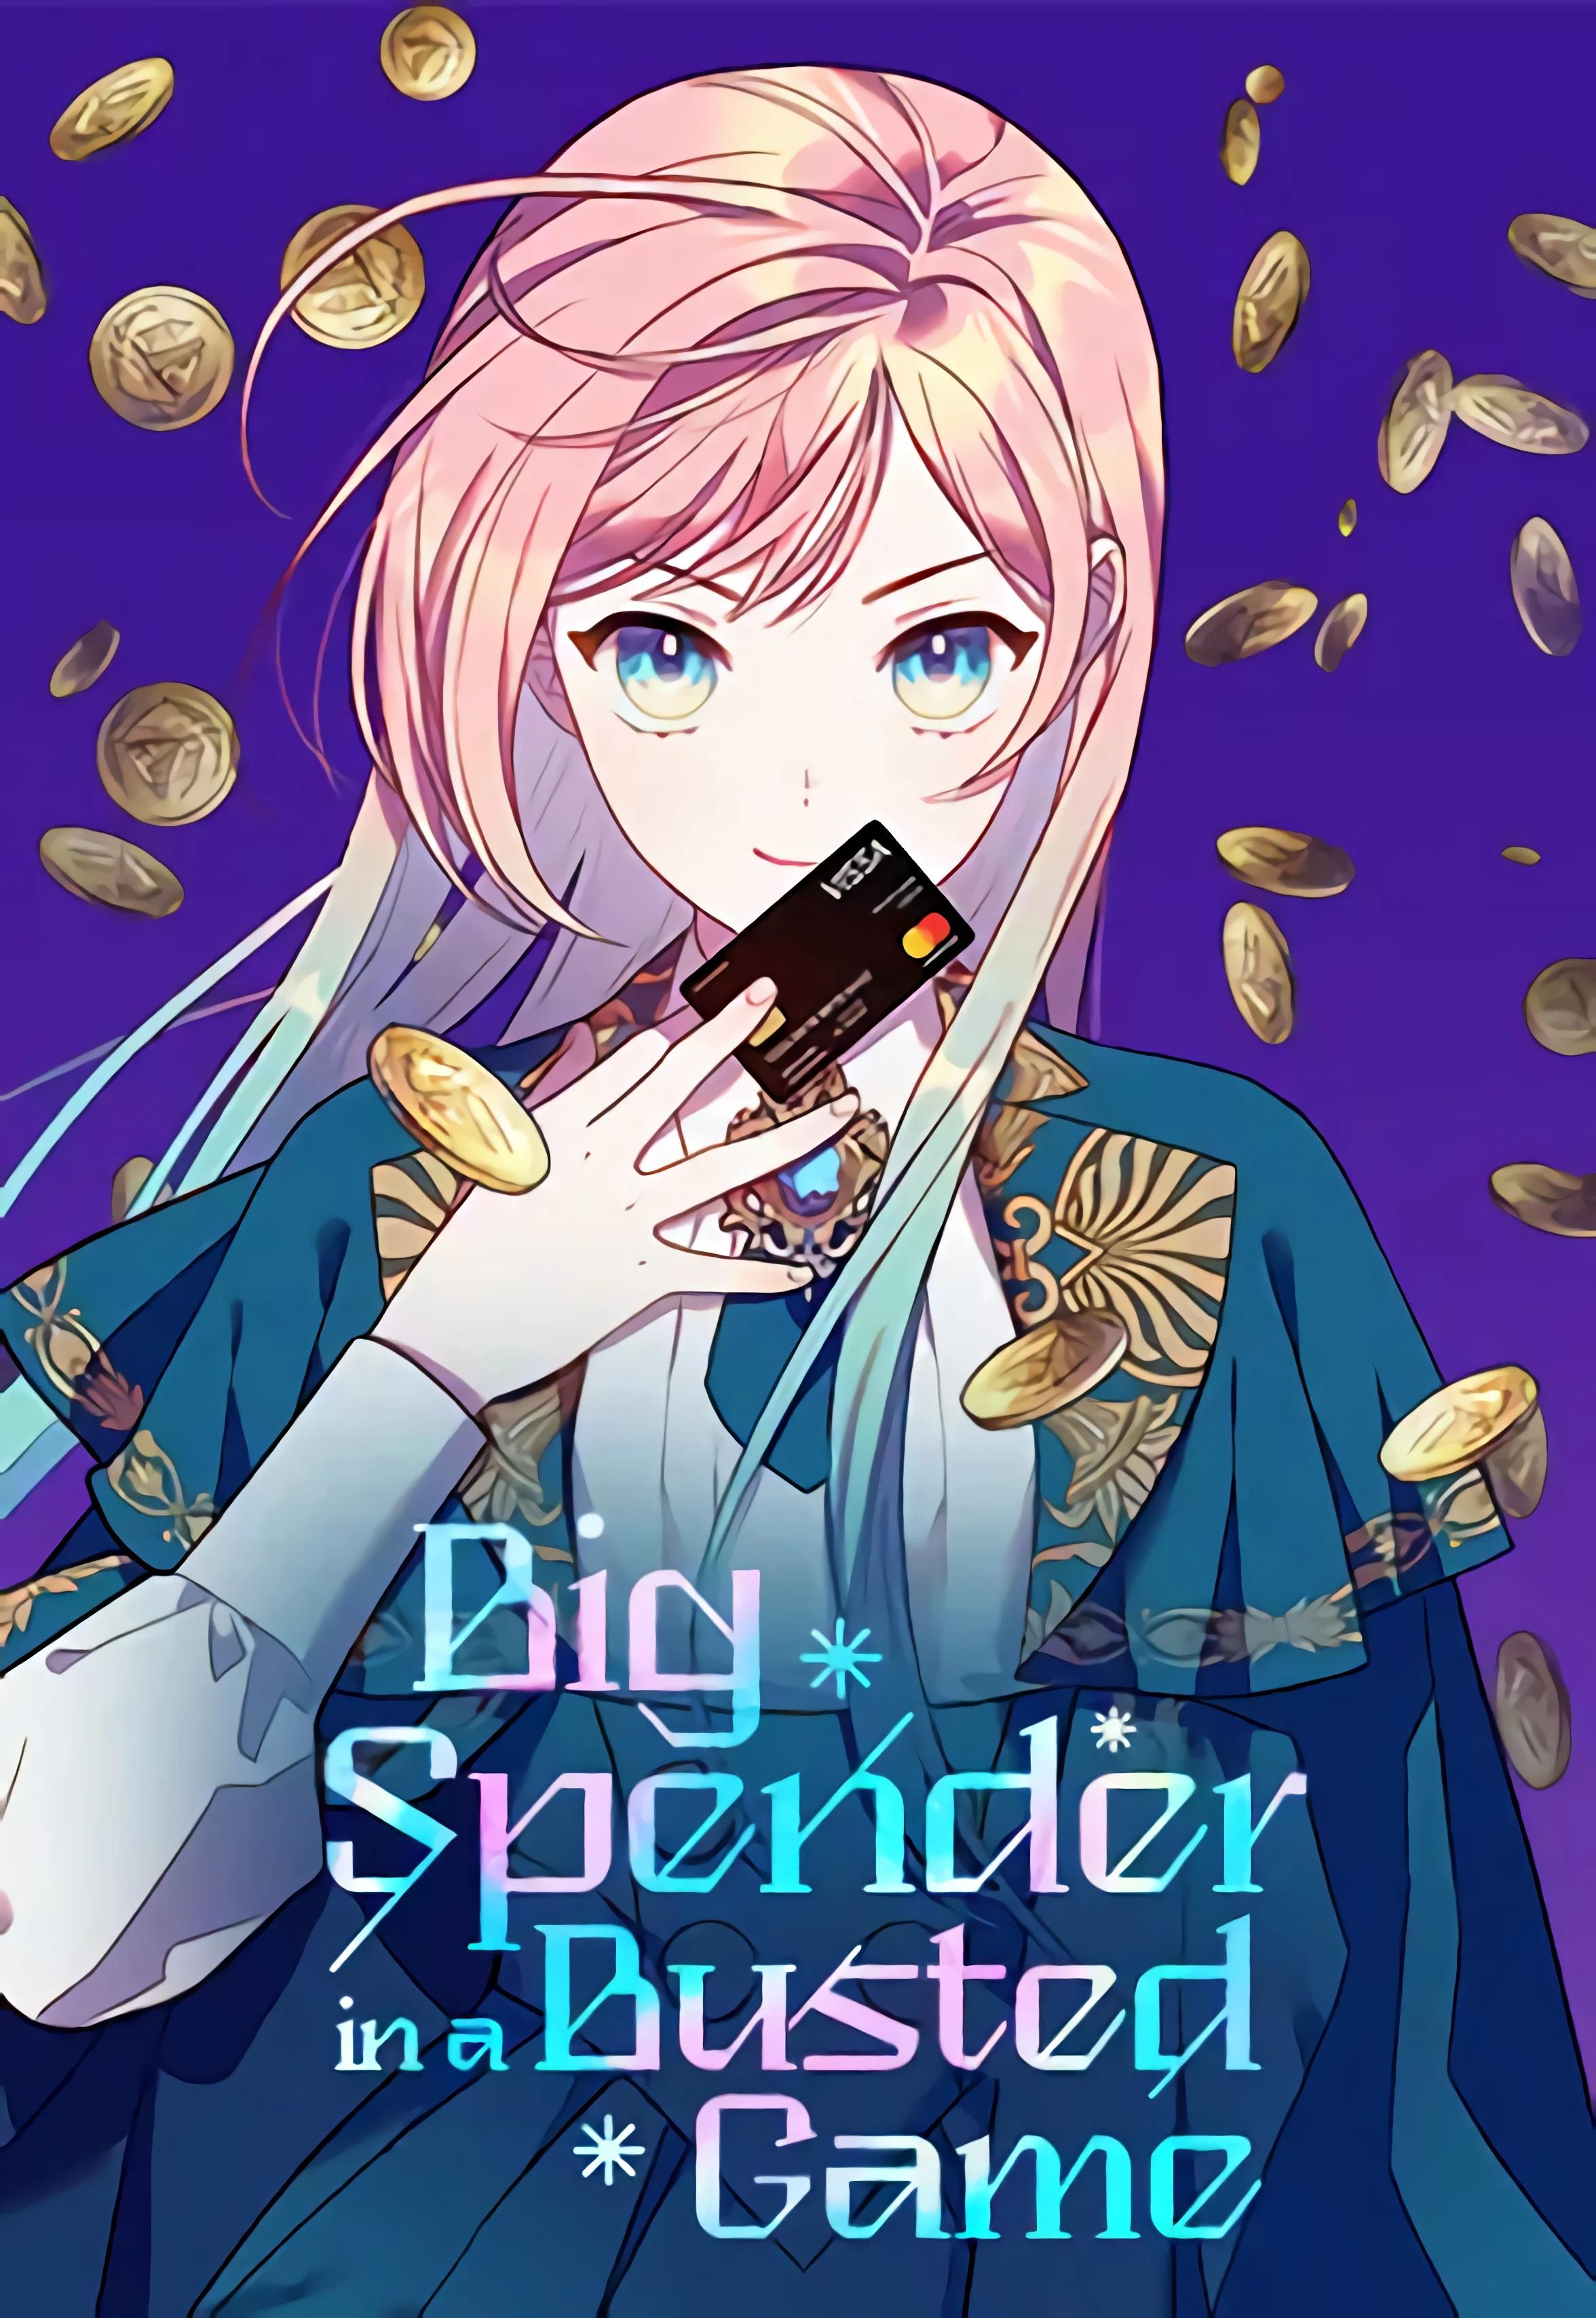 Big Spender in a Busted Game cover image